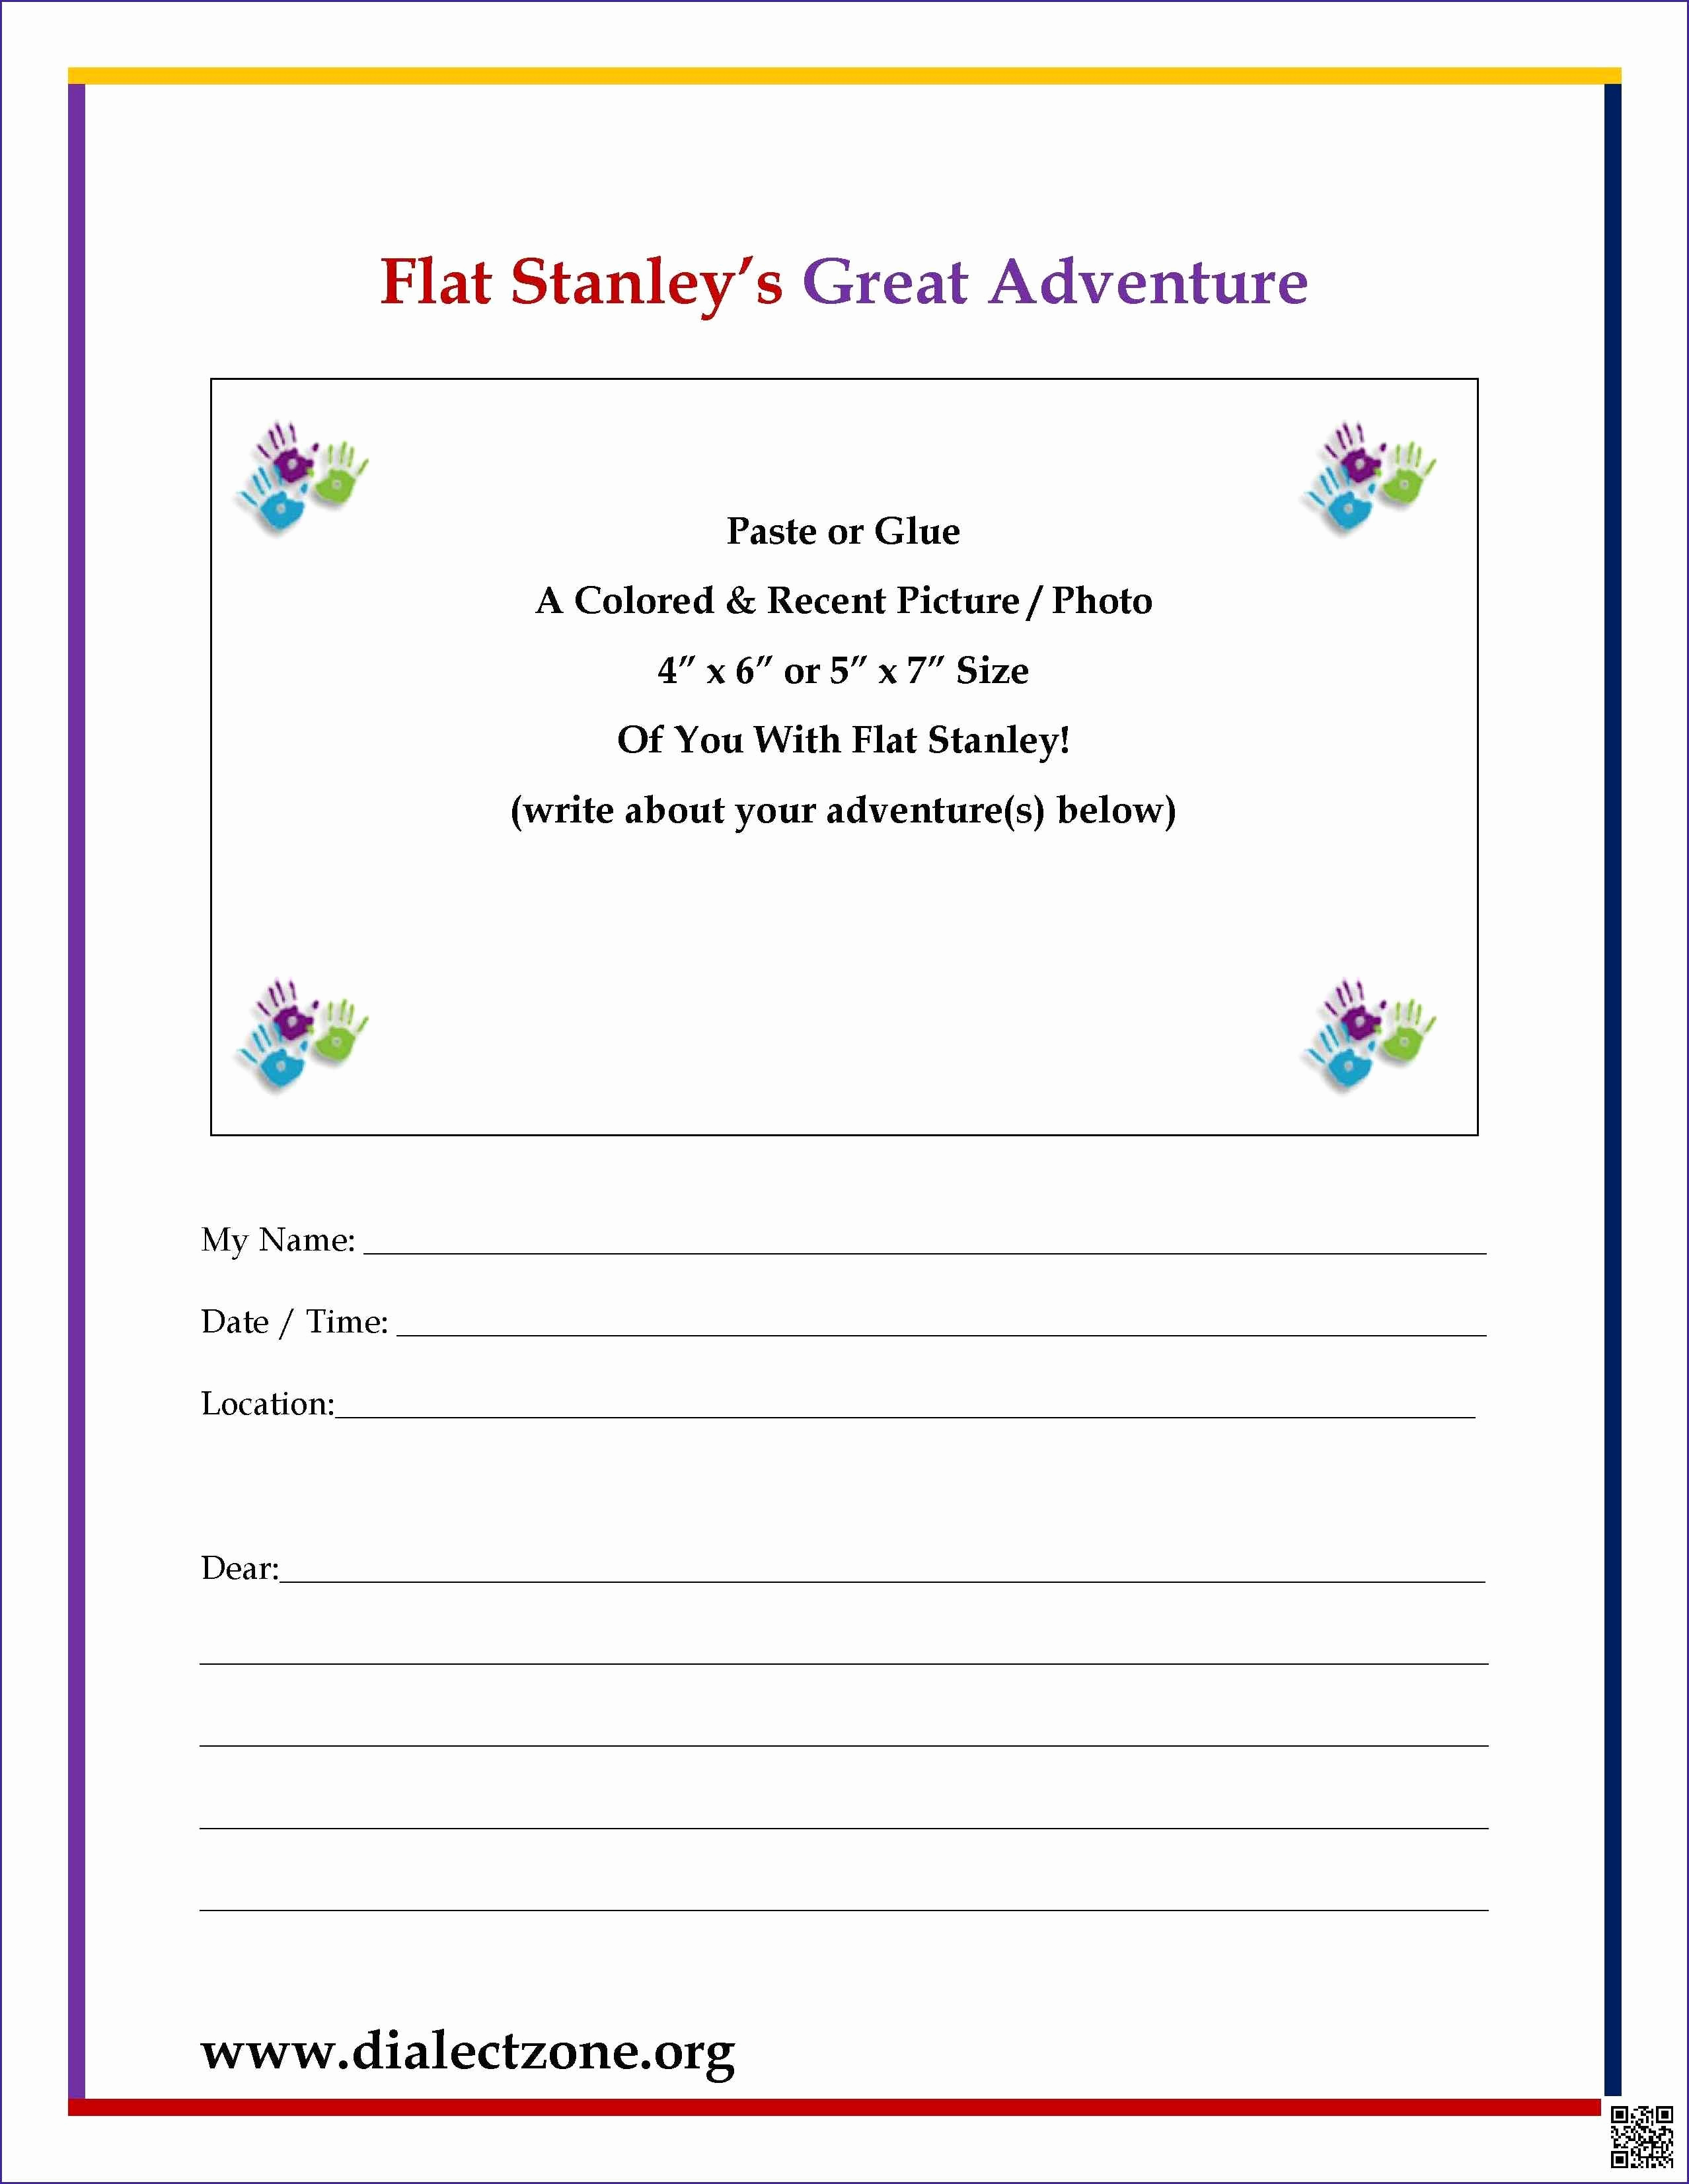 Flat Stanley Letter Template - soft Corporate Offer Template